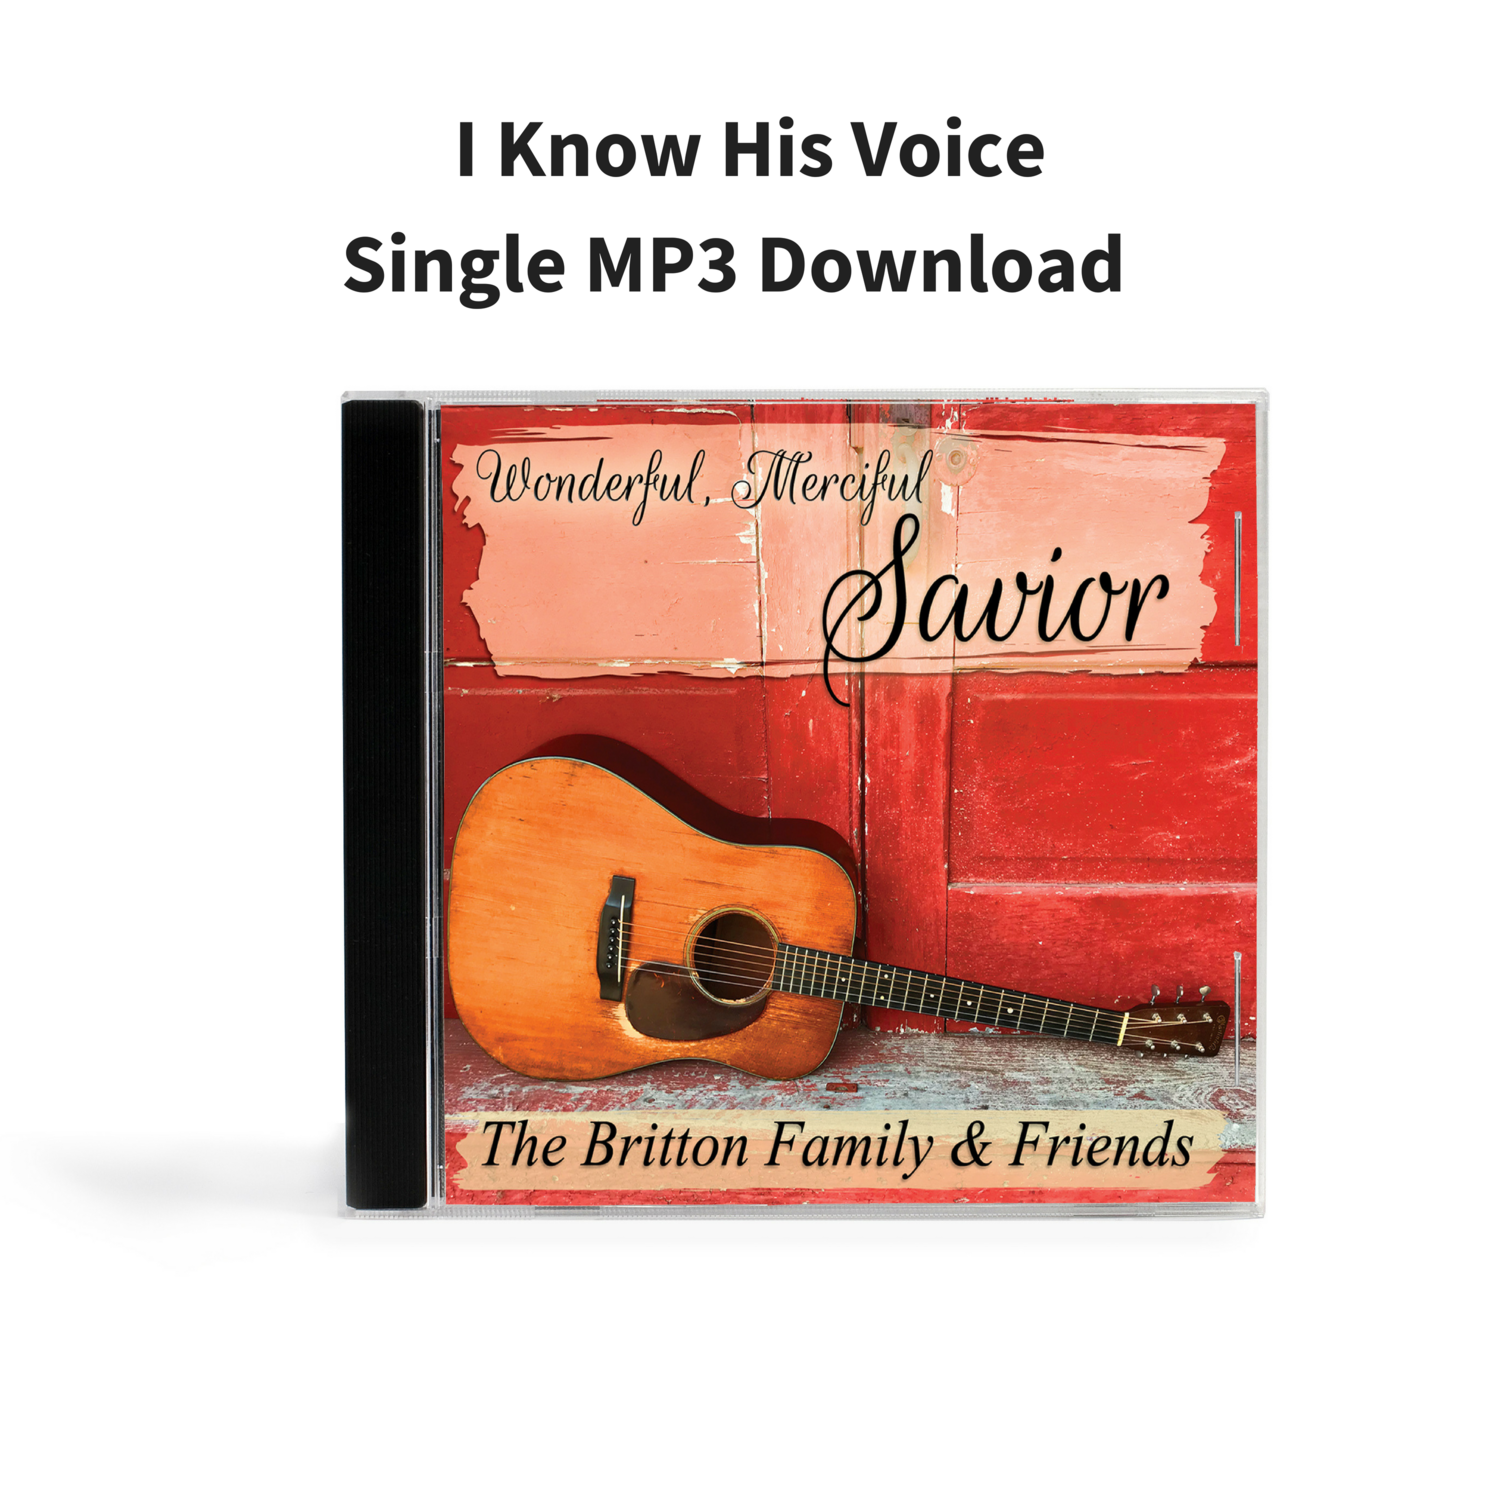 I Know His Voice - Single MP3 Download